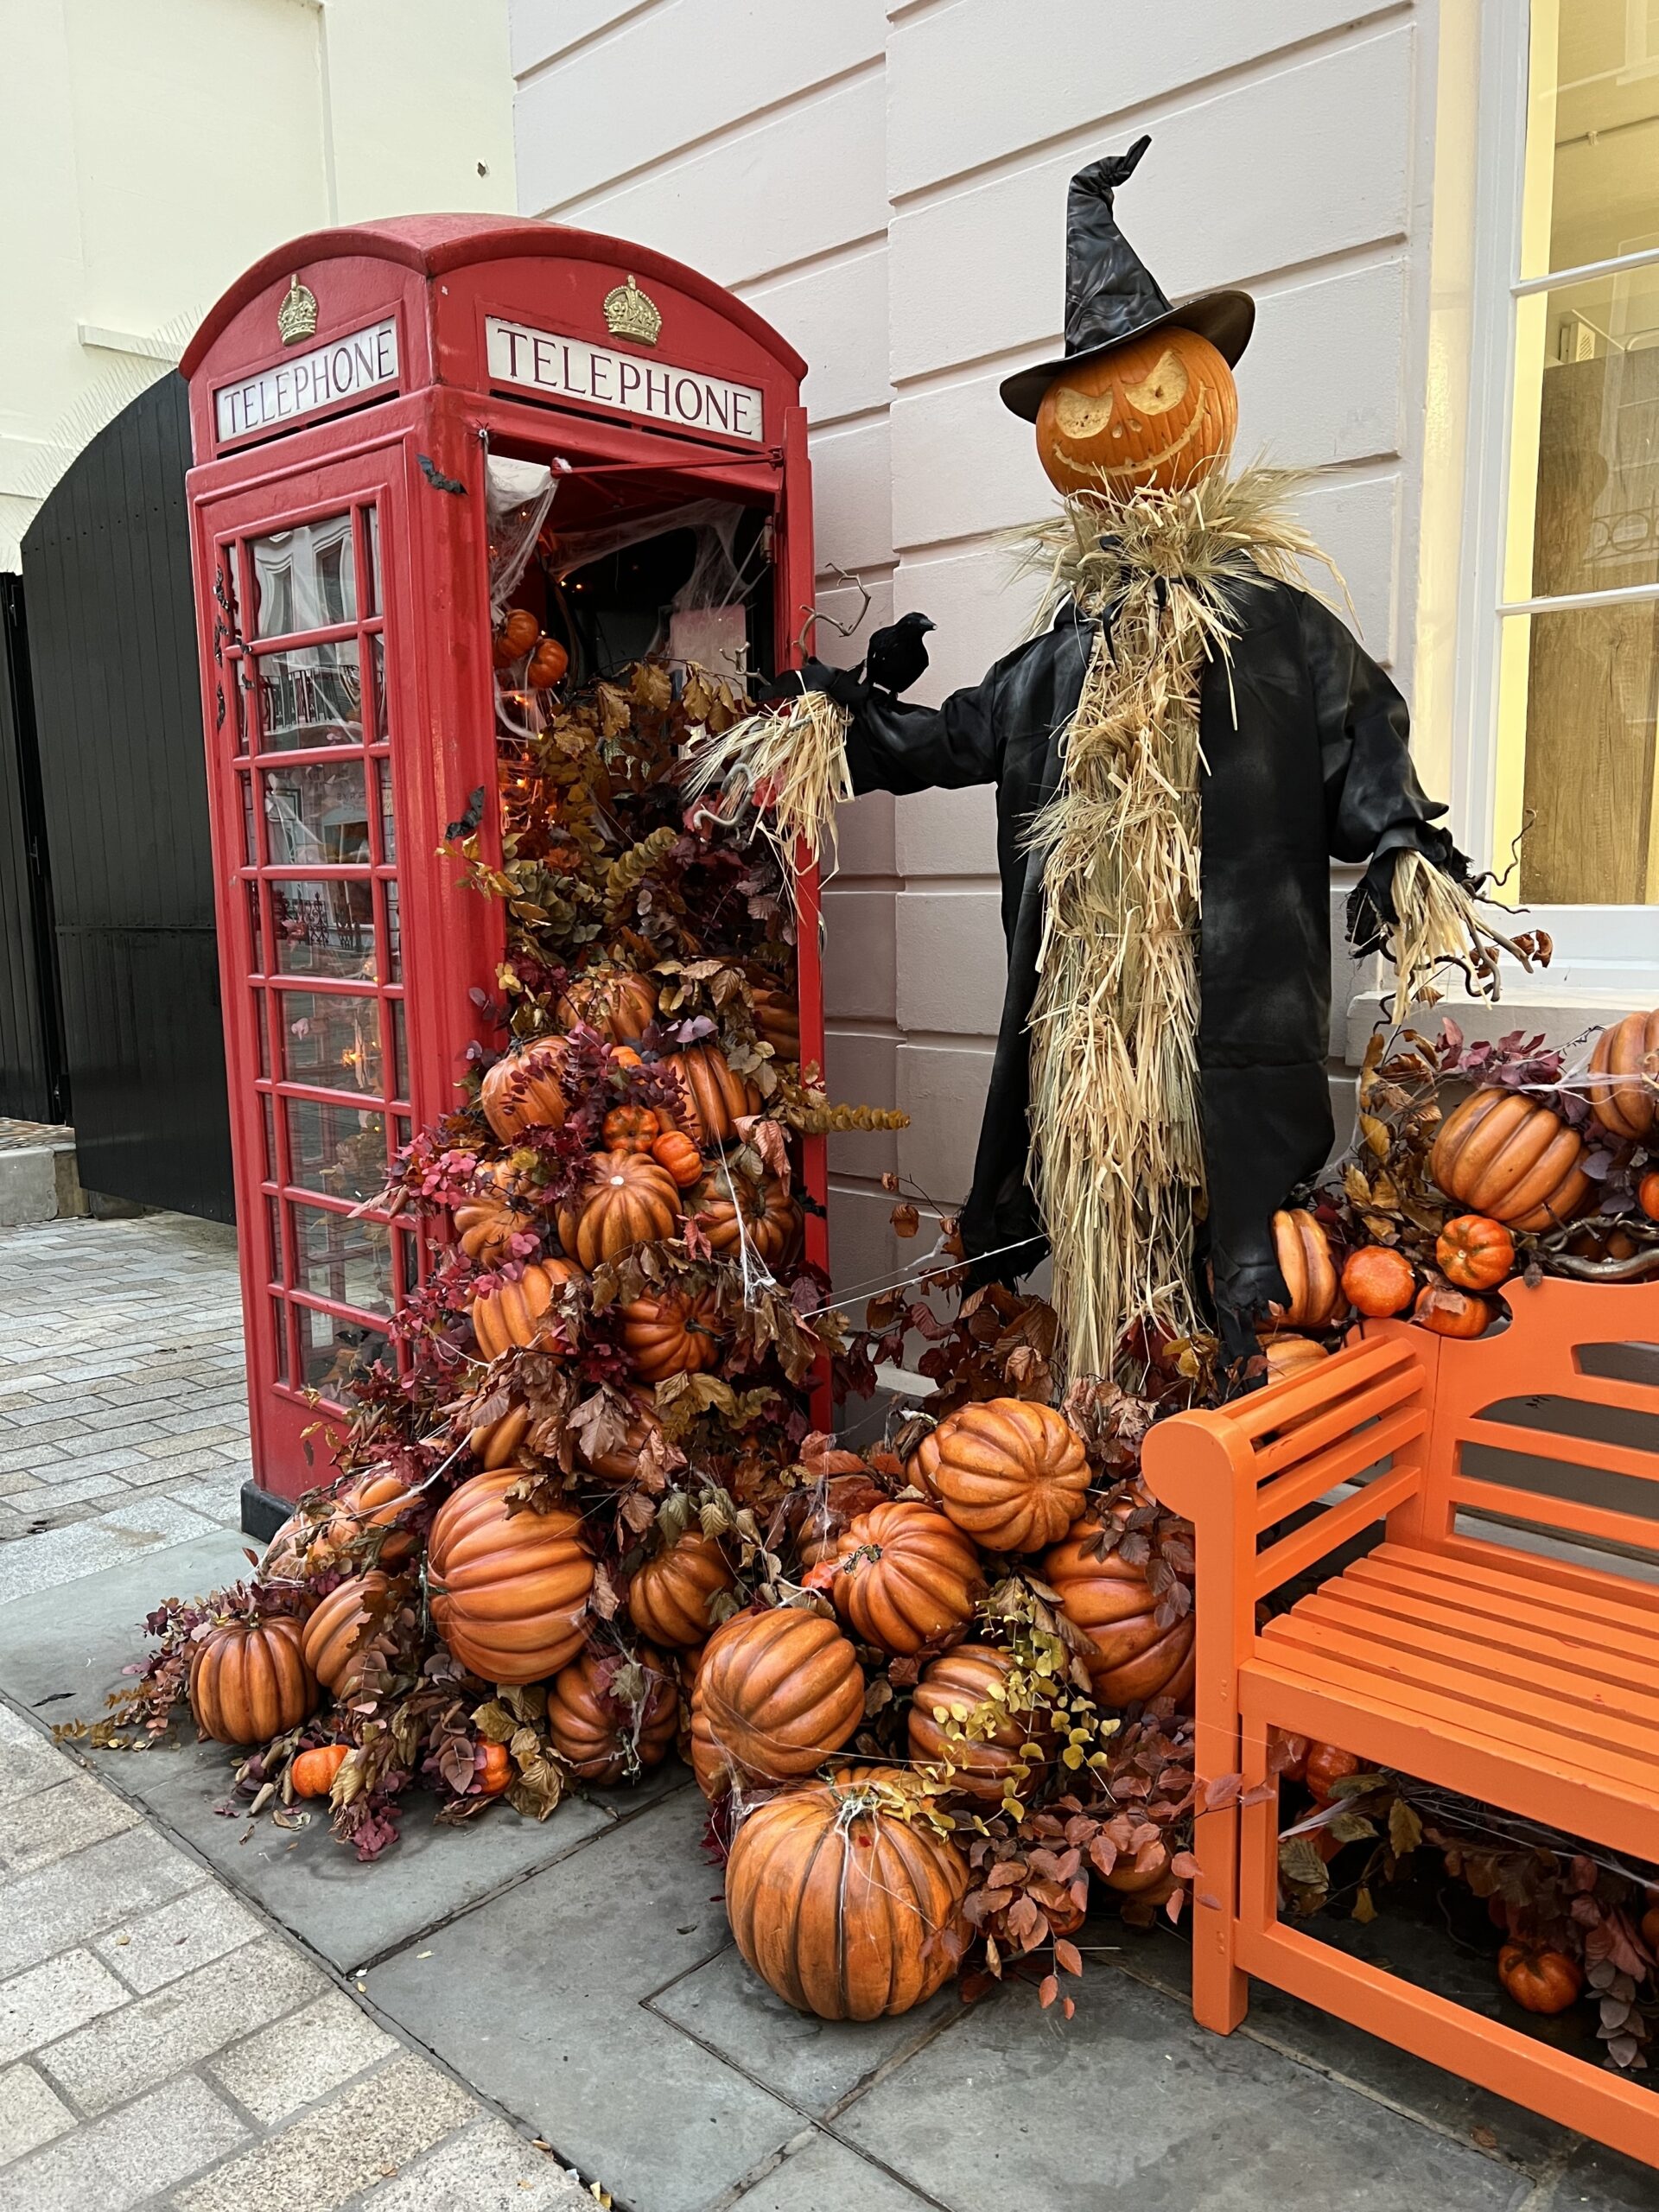 Halloween decorations in London, England. There are pumpkins coming out a telephone box onto a bench. October is  the best time to visit London. 